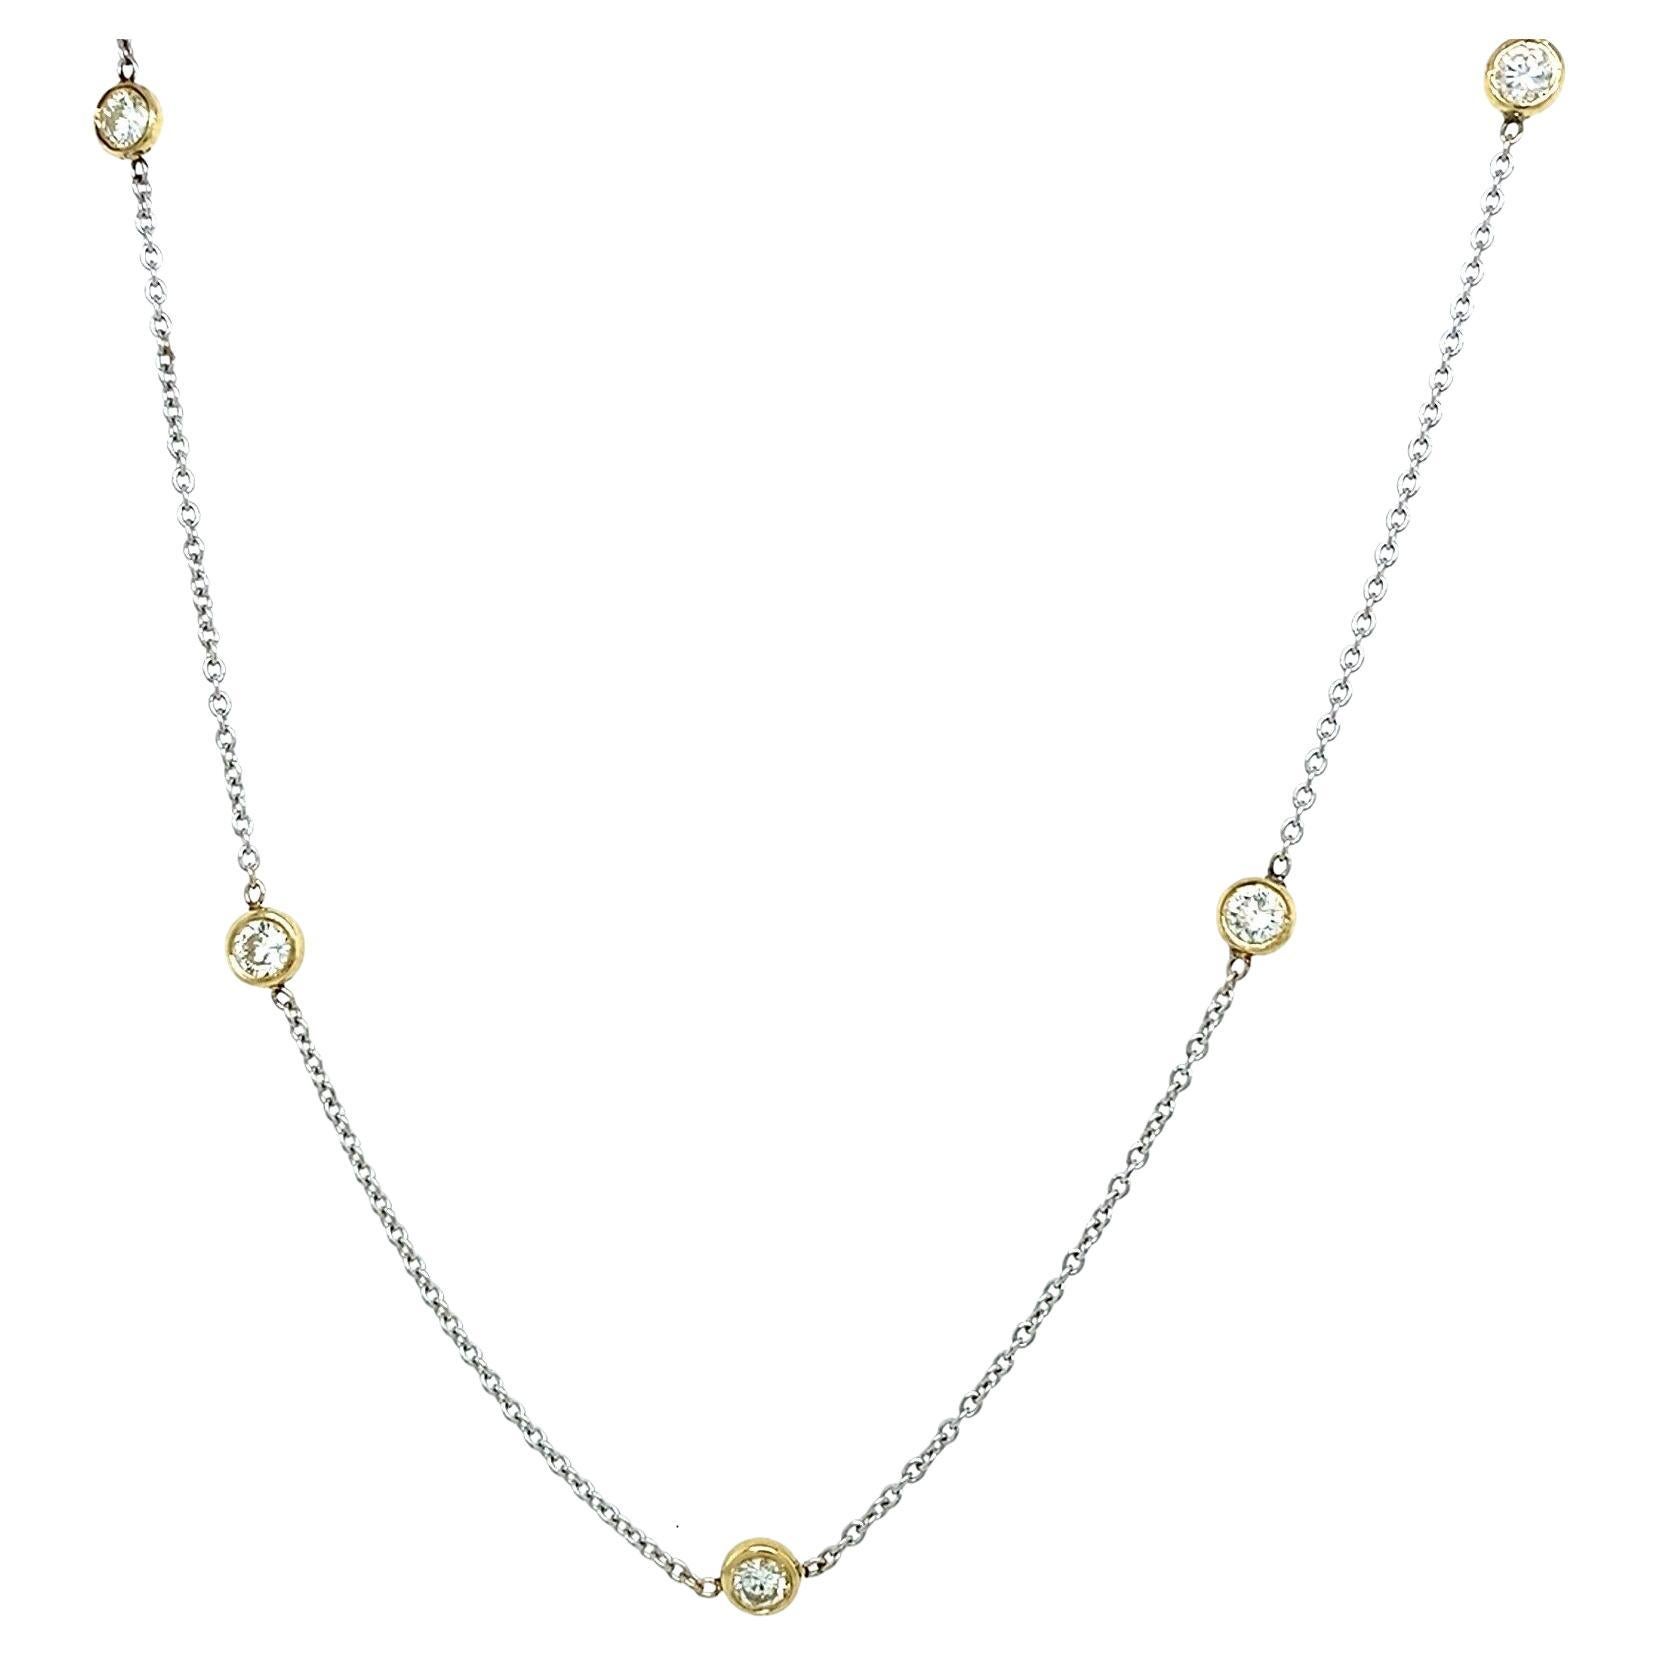 10-Stone Rubover Necklace Set with 1.60ct G/H SI Diamonds in 14ct White Gold